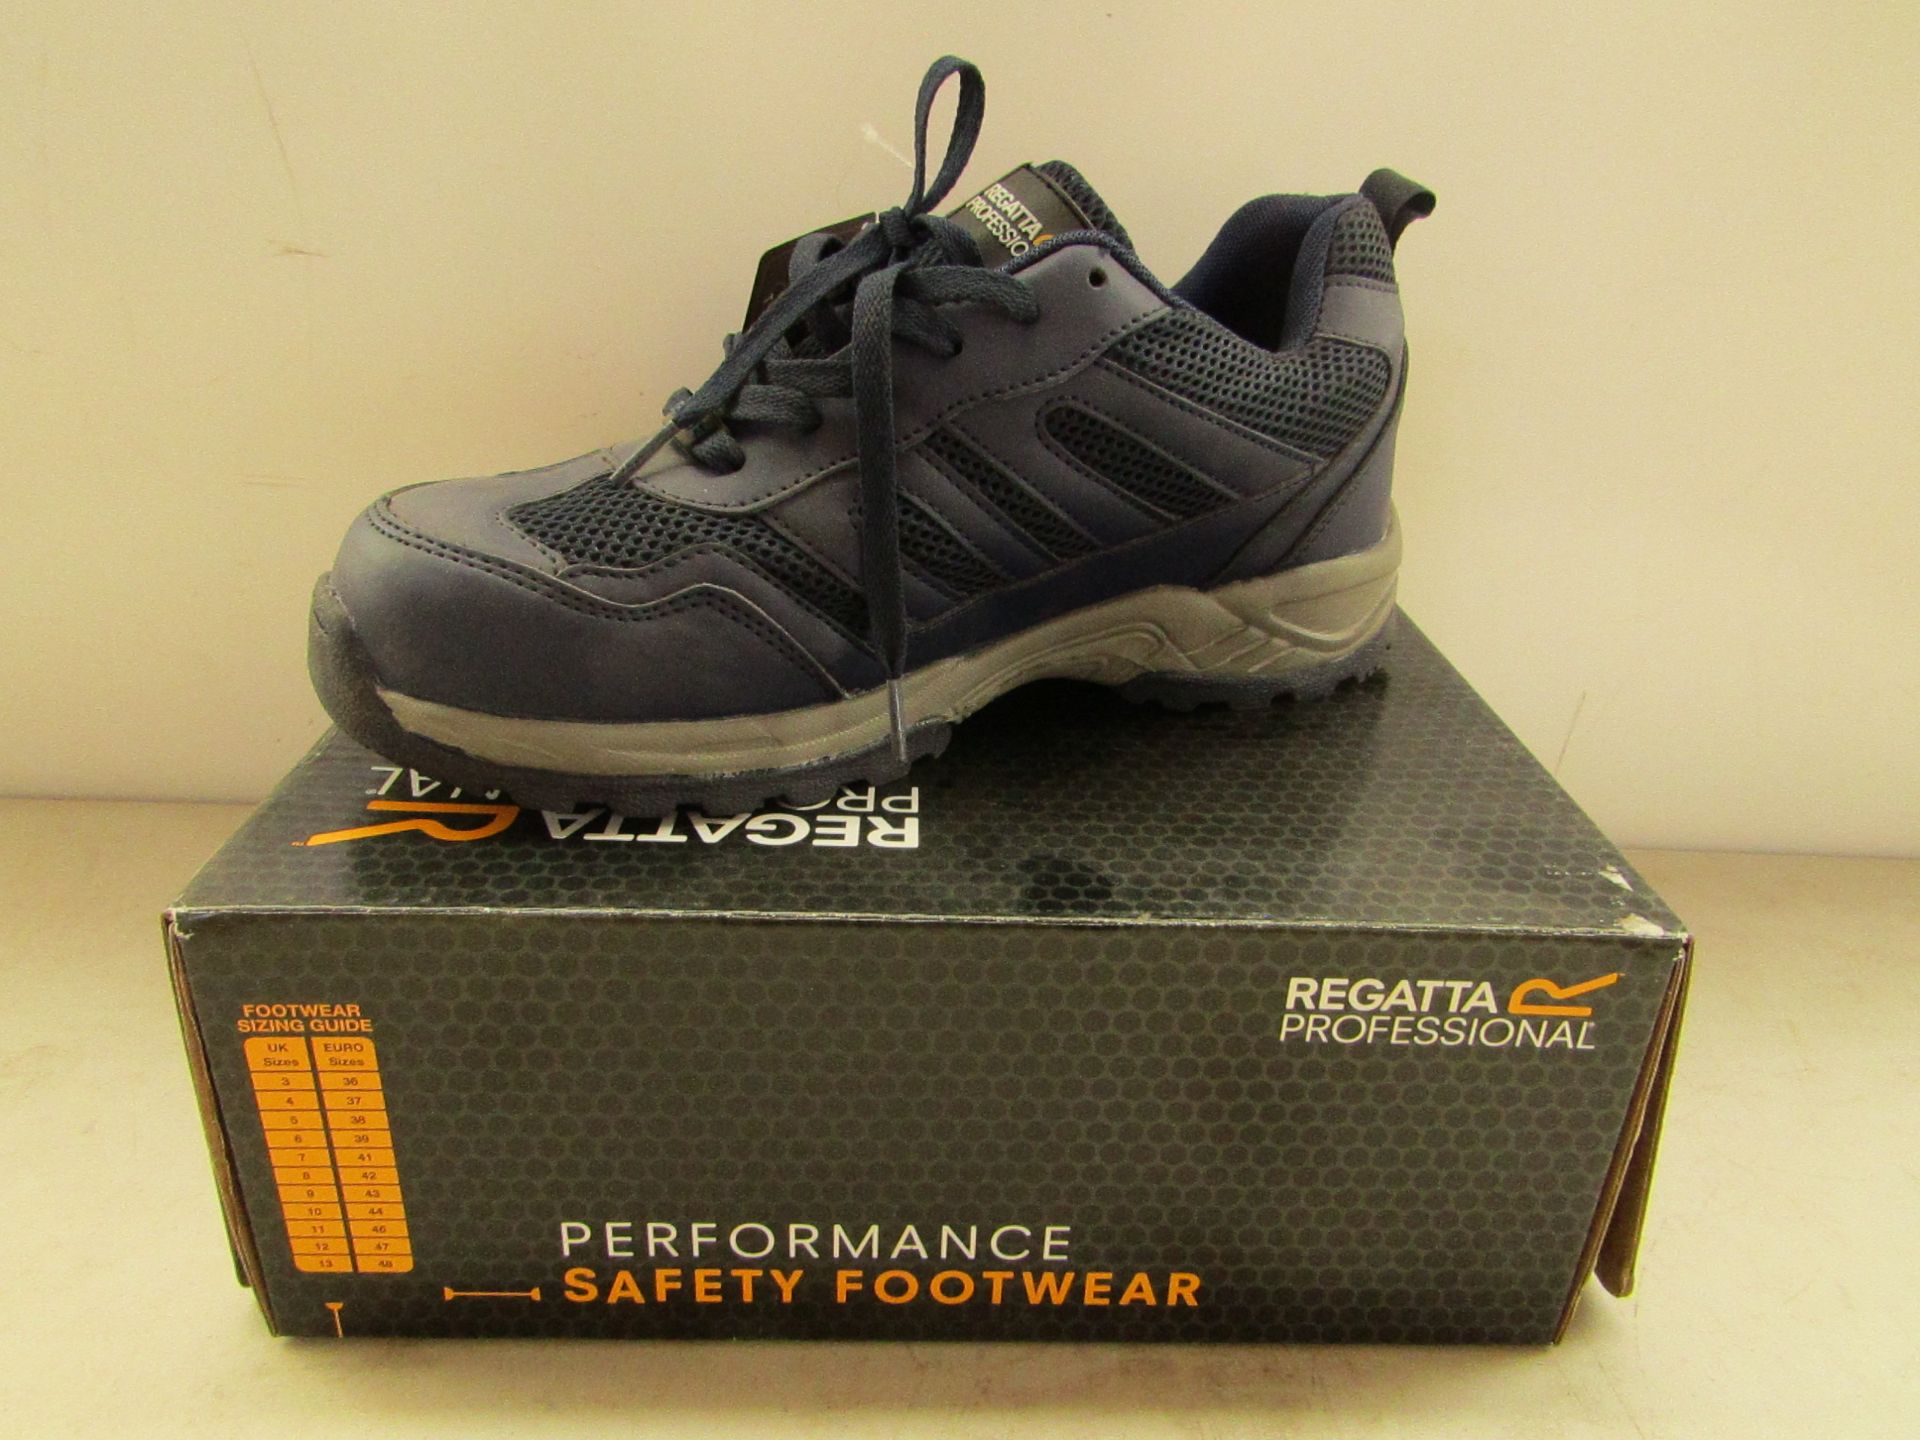 Regatta Professional Steplite SB steel toe cap safety trainers, size UK9, RRP £69.99 new and boxed.